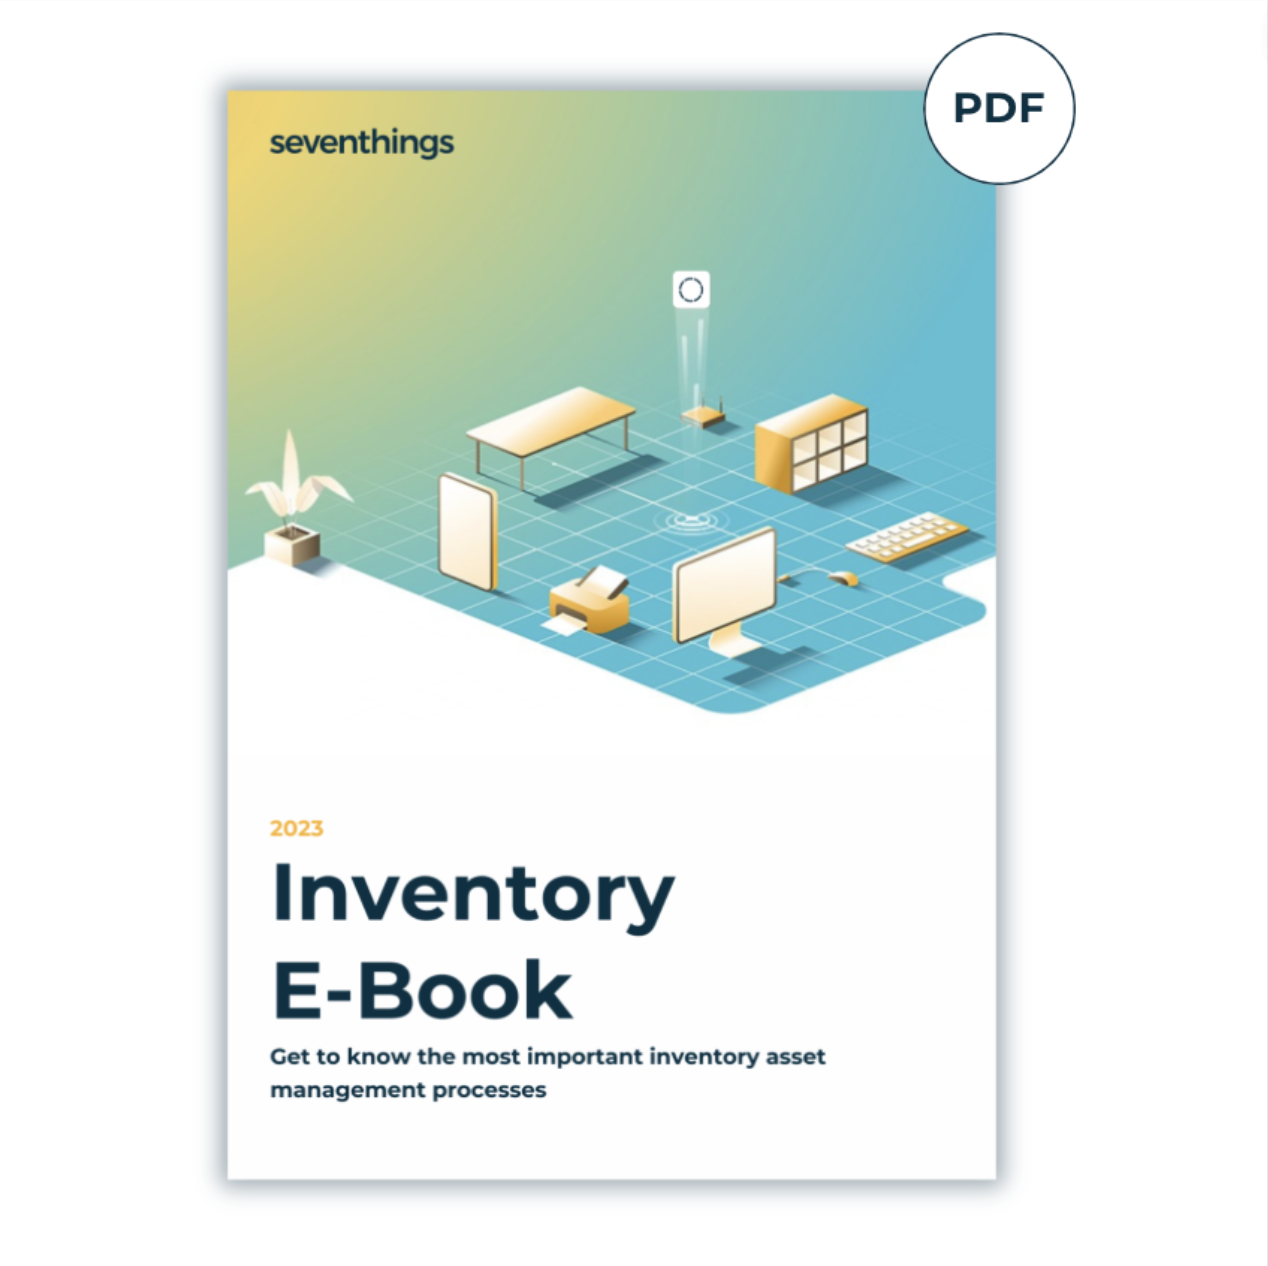 Inventory E-Book from seventhings